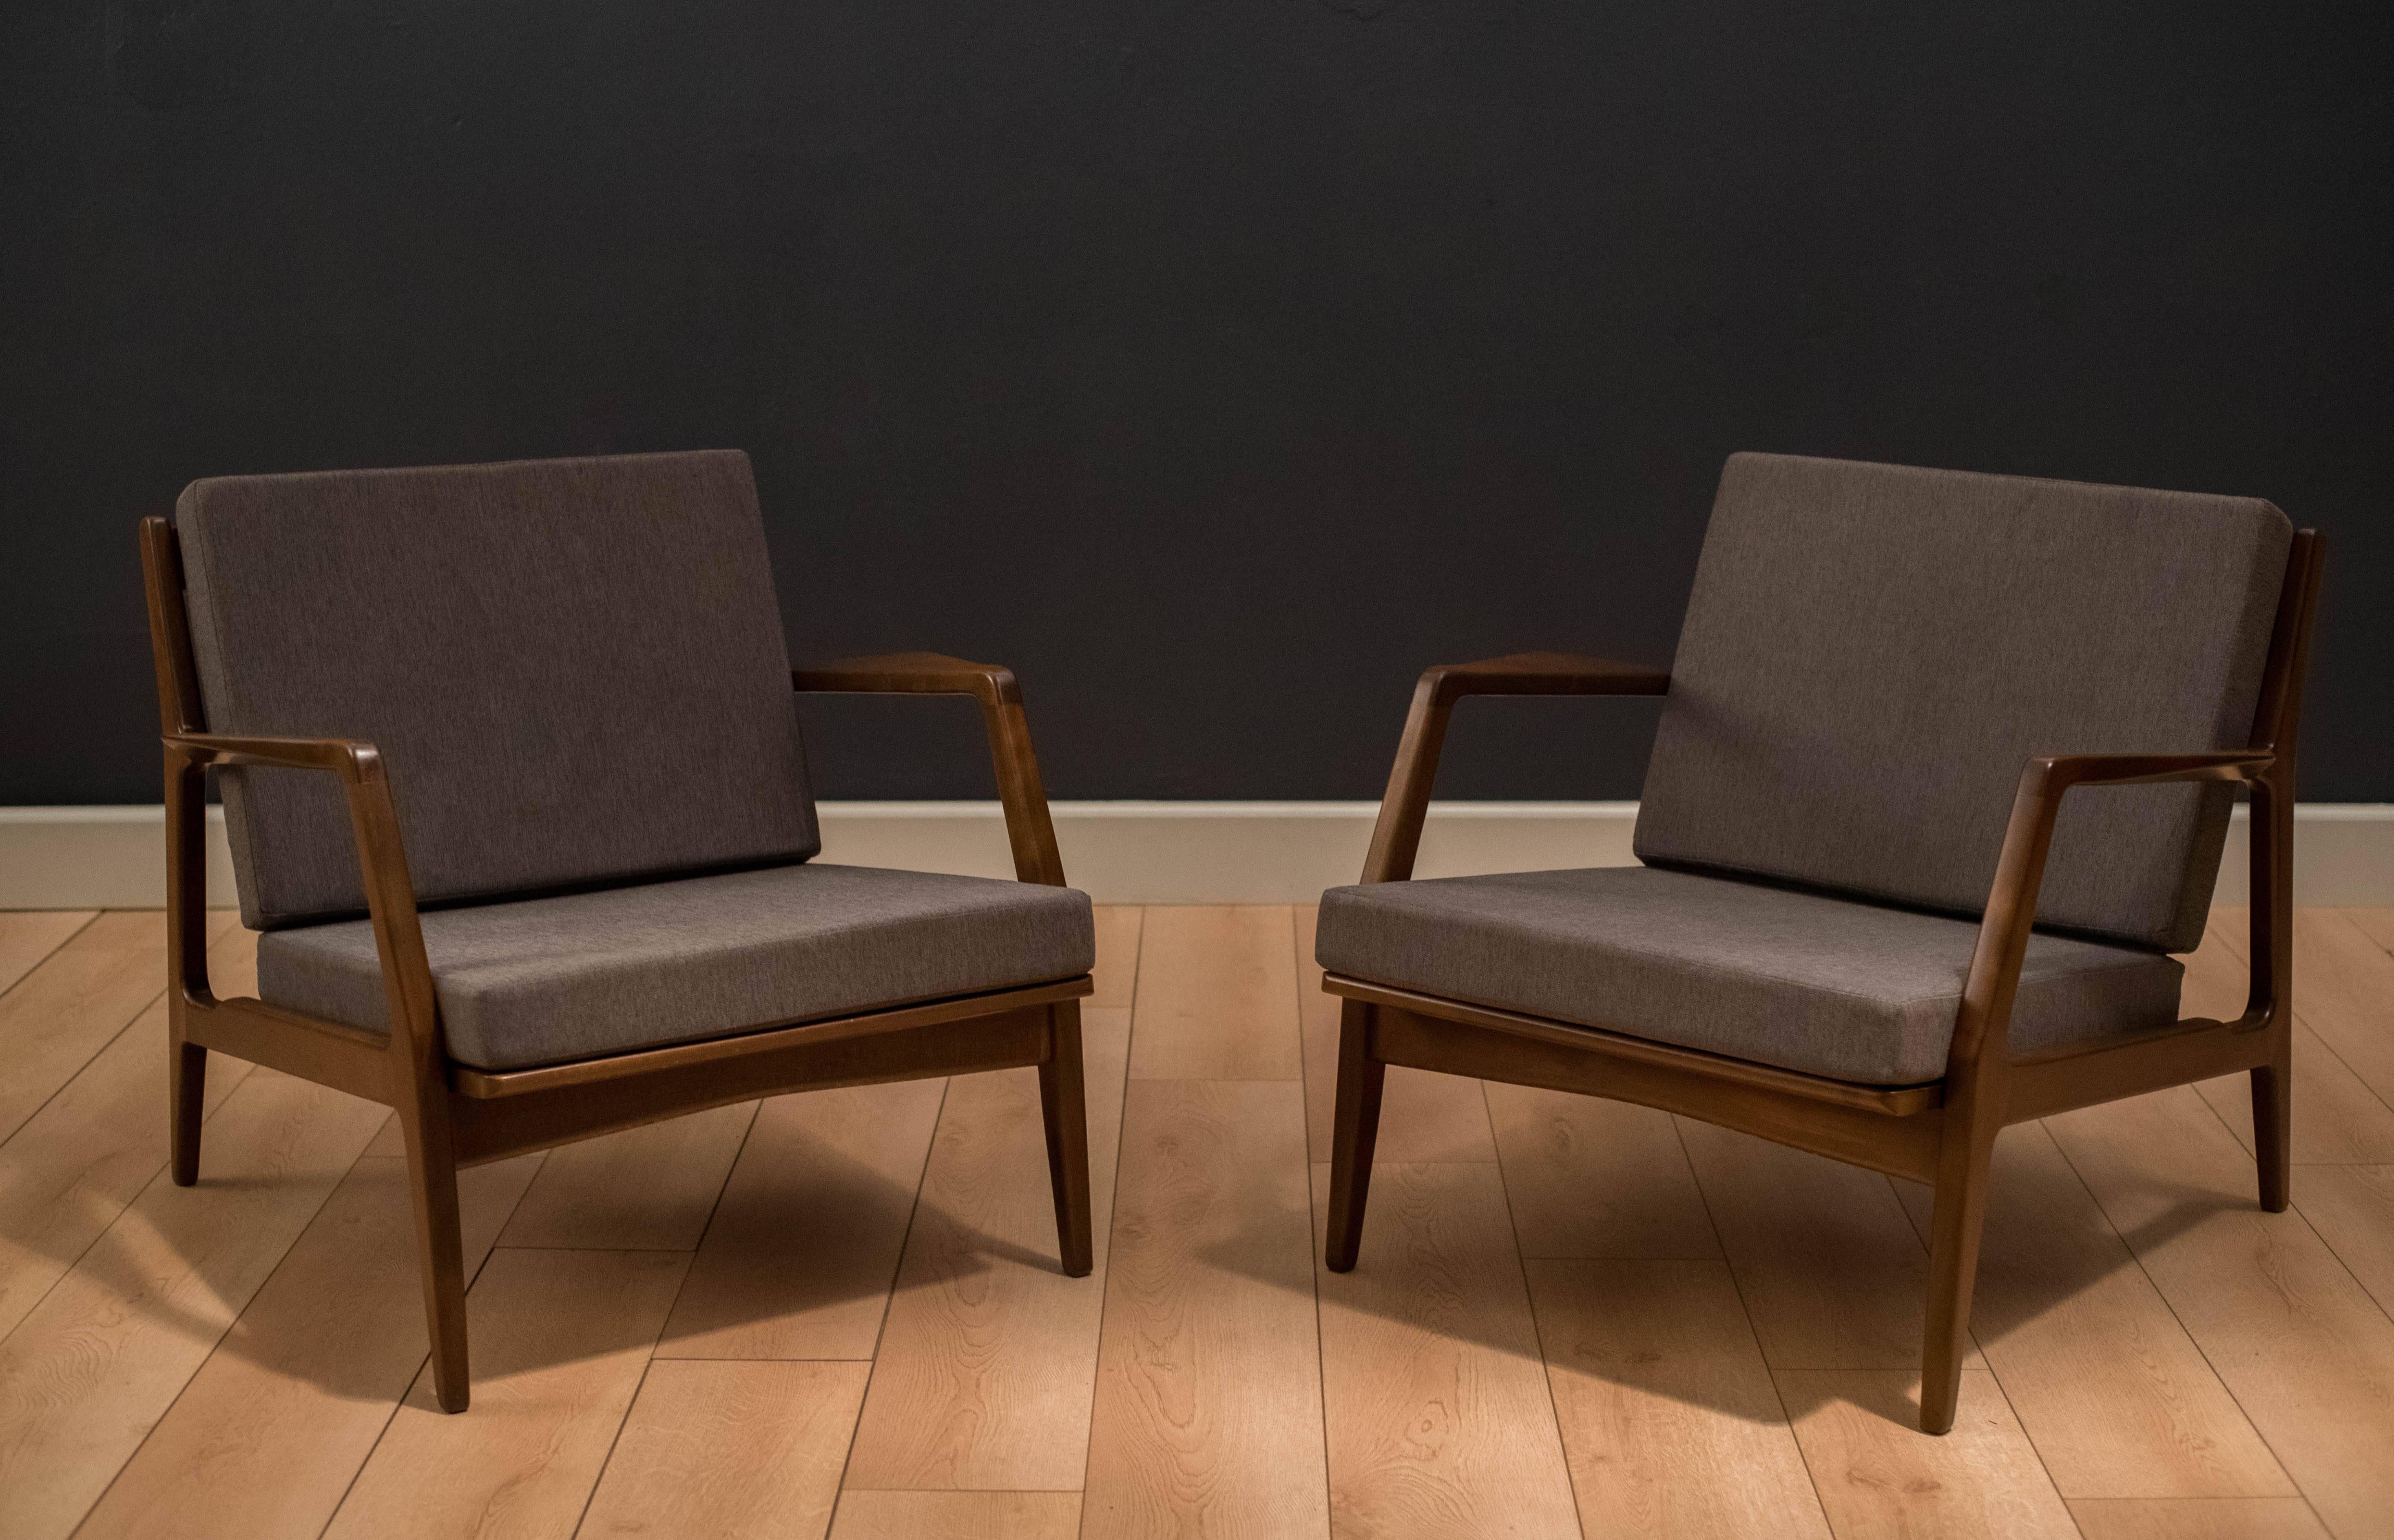 Danish modern lounge chairs designed by Ib Kofod Larsen for Selig. This pair has been professionally reupholstered in a charcoal grey fabric with brand new foam. Includes original webbing and price is for the pair. 



